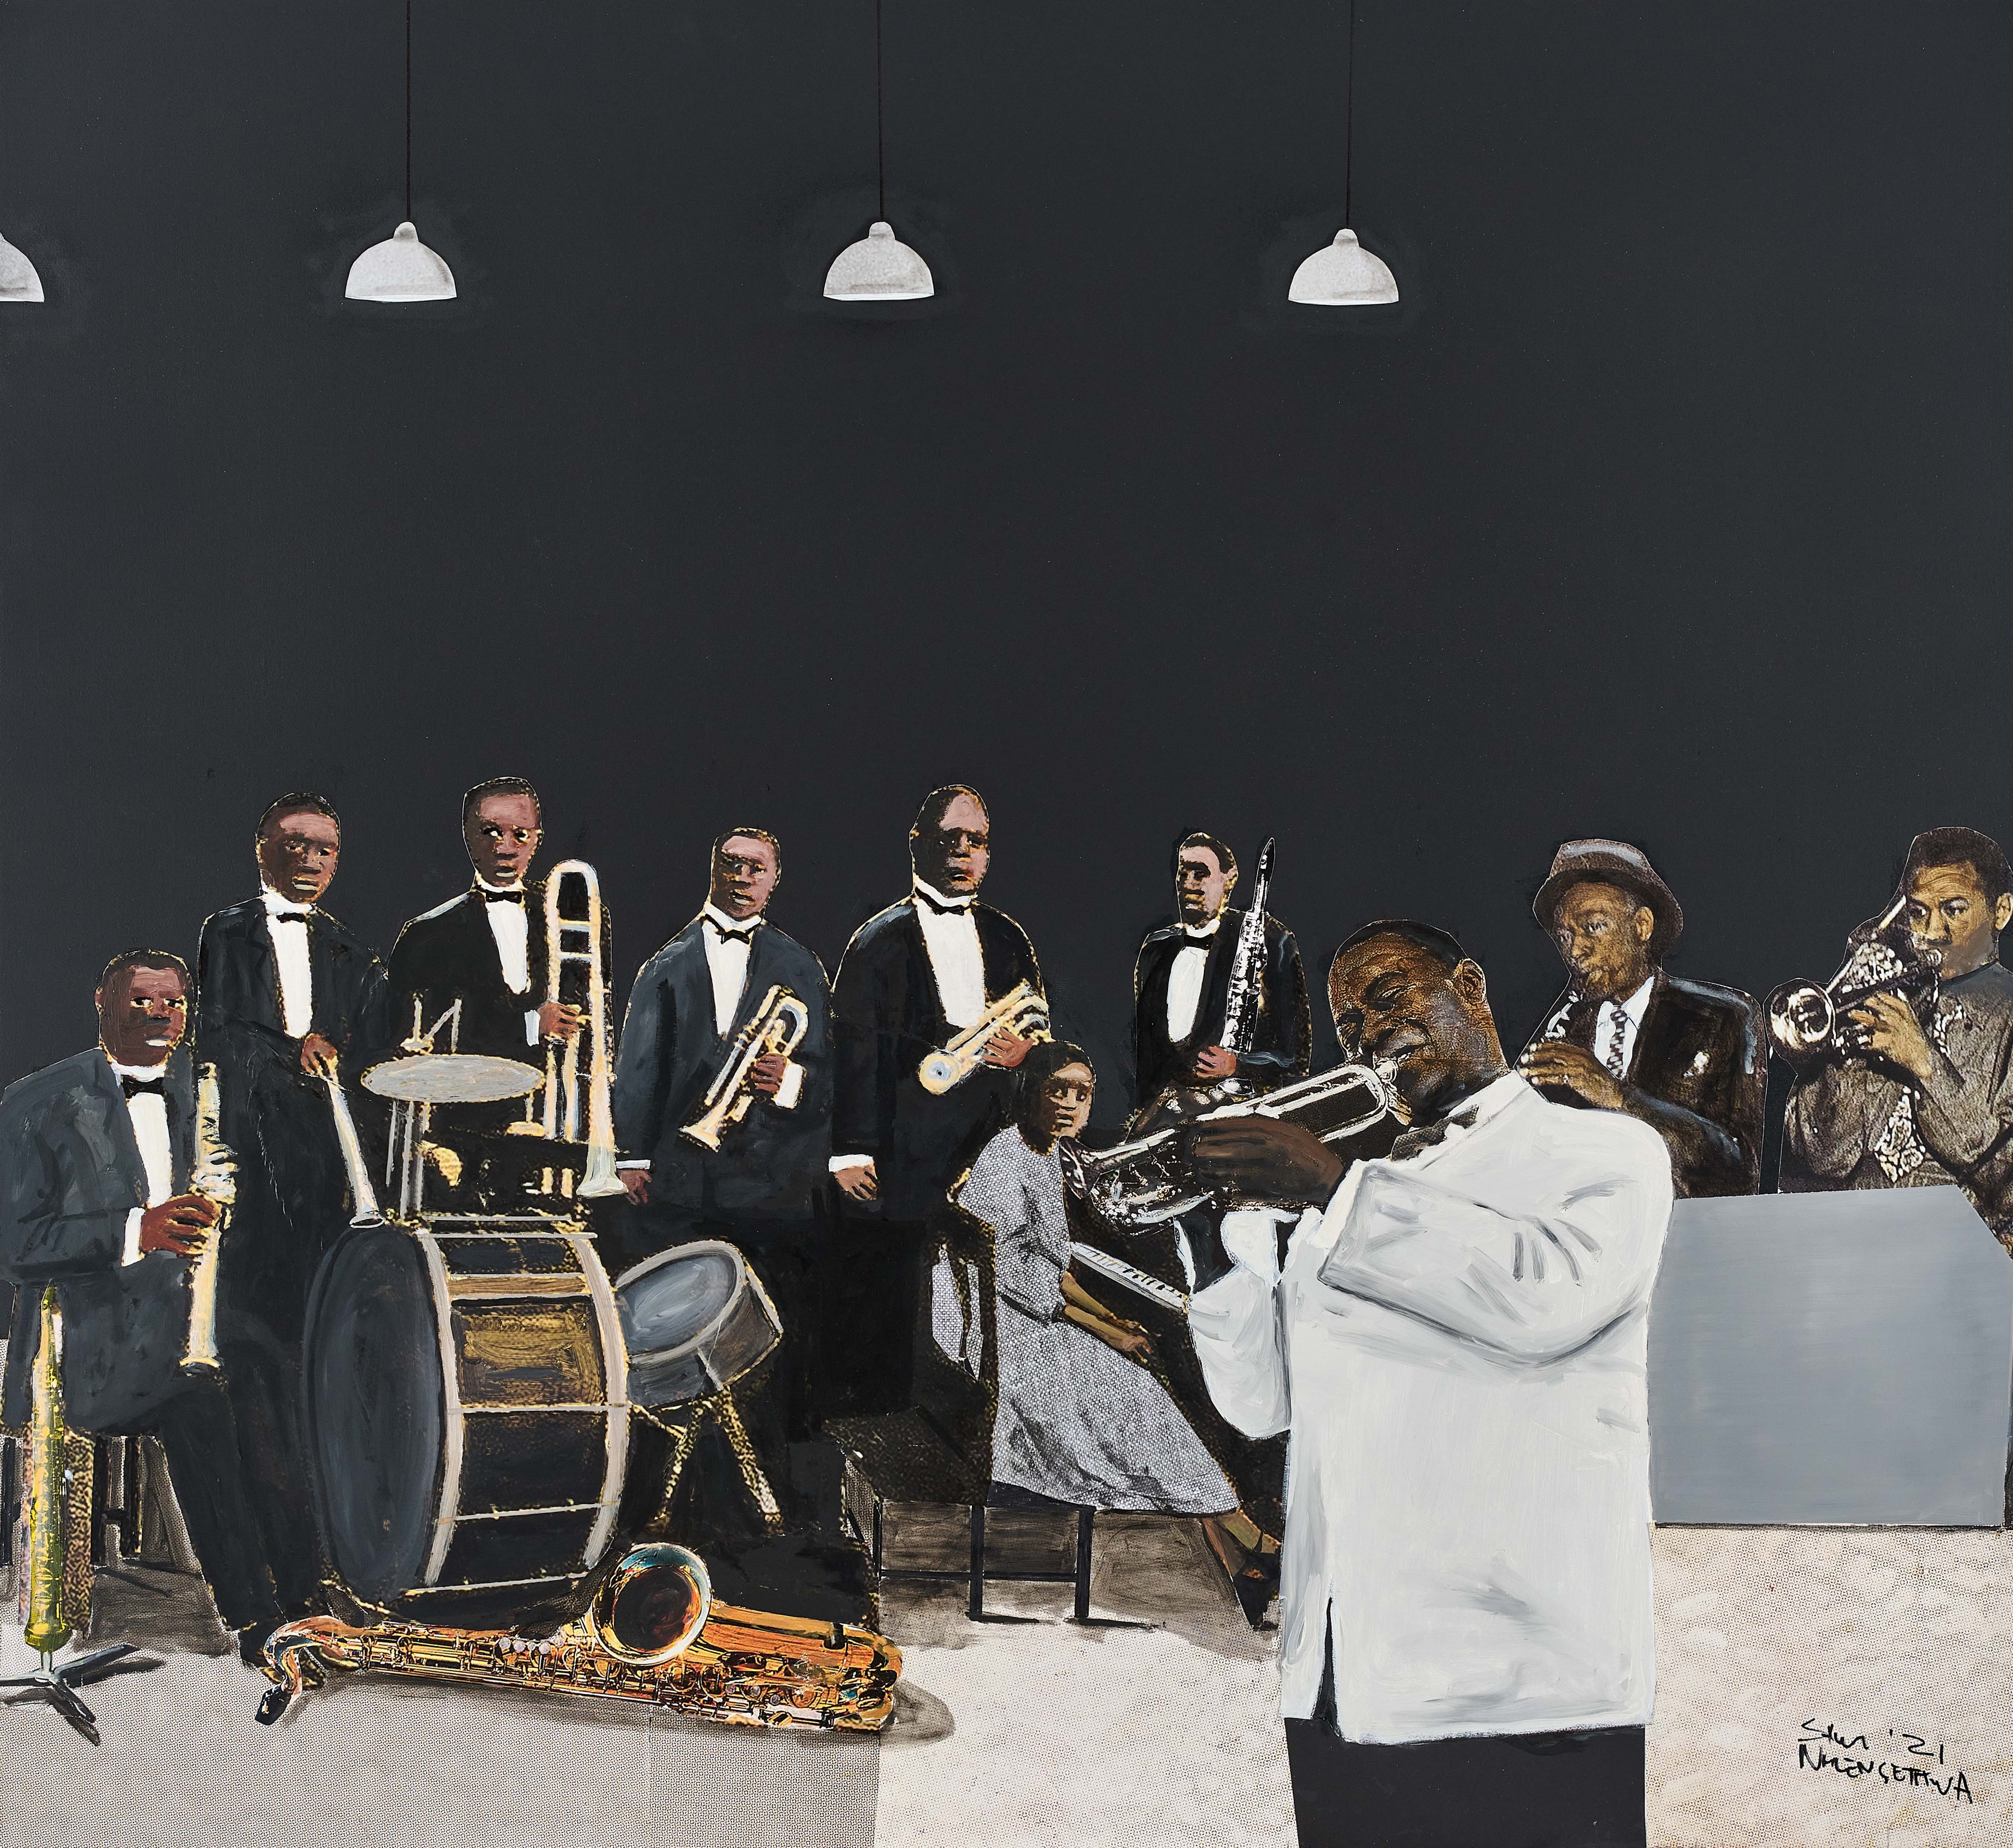 Satchmo and his band, 2021
Mixed media on canvas
109.8 x 120 x 9.8 cm / 43.2 x 47.2 x 3.9 in.

Enquire